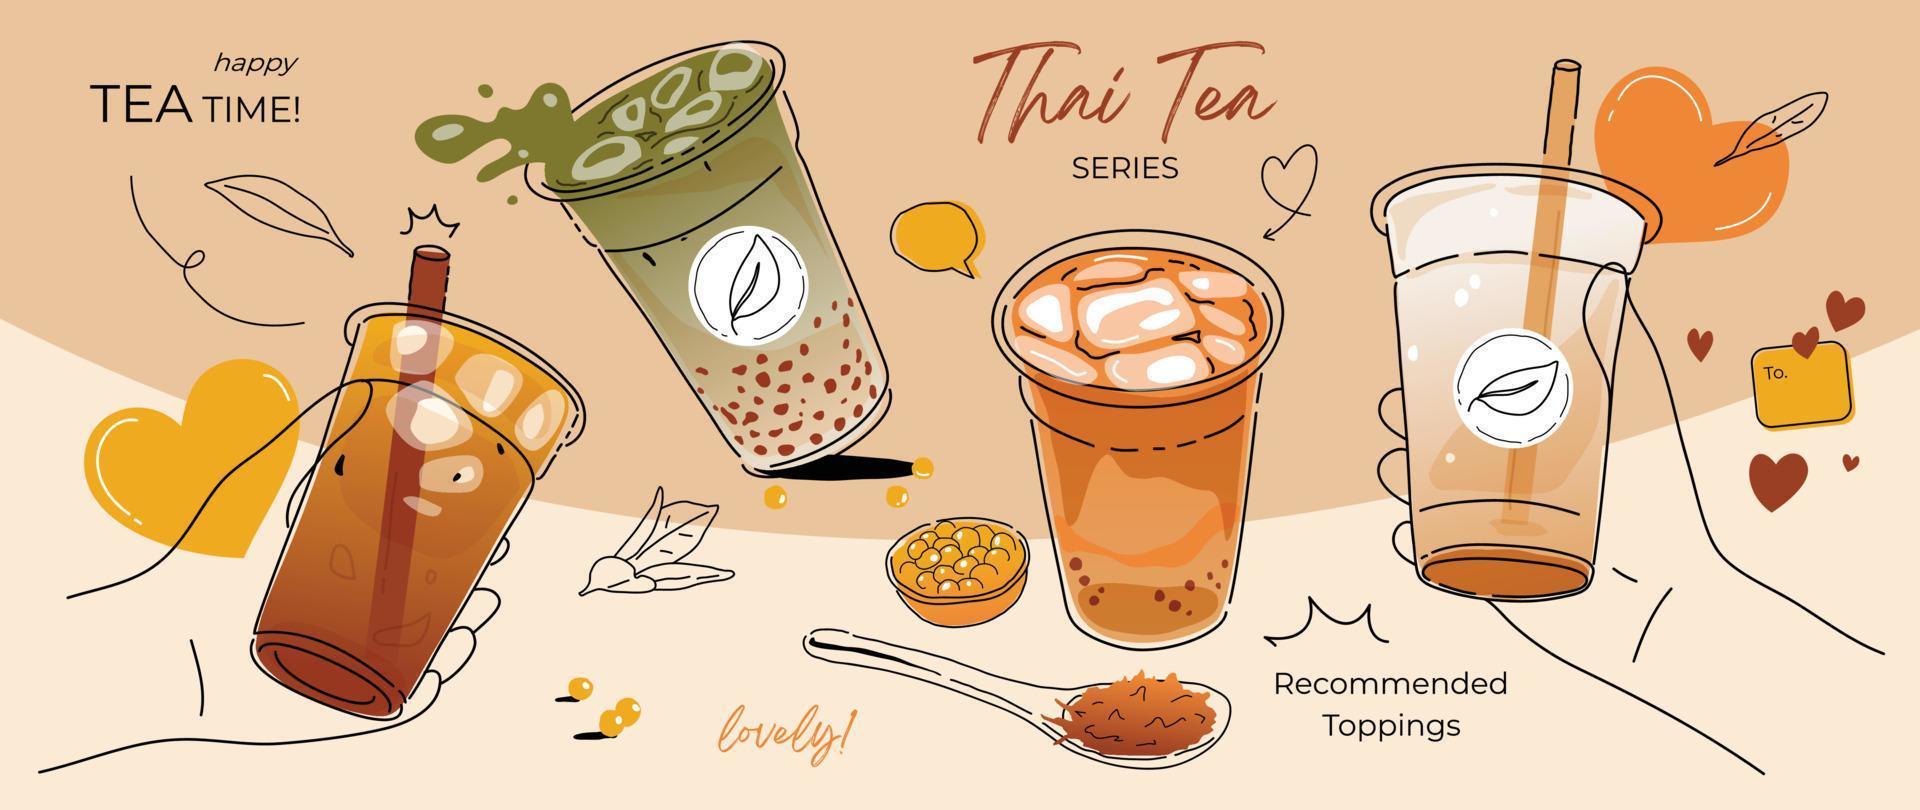 Ice tea summer drinks special promotions design. Thai tea, matcha green tea, fresh yummy drinks, bubble pearl milk tea, soft drinks with logo and doodle style for advertisement, banner, poster. vector